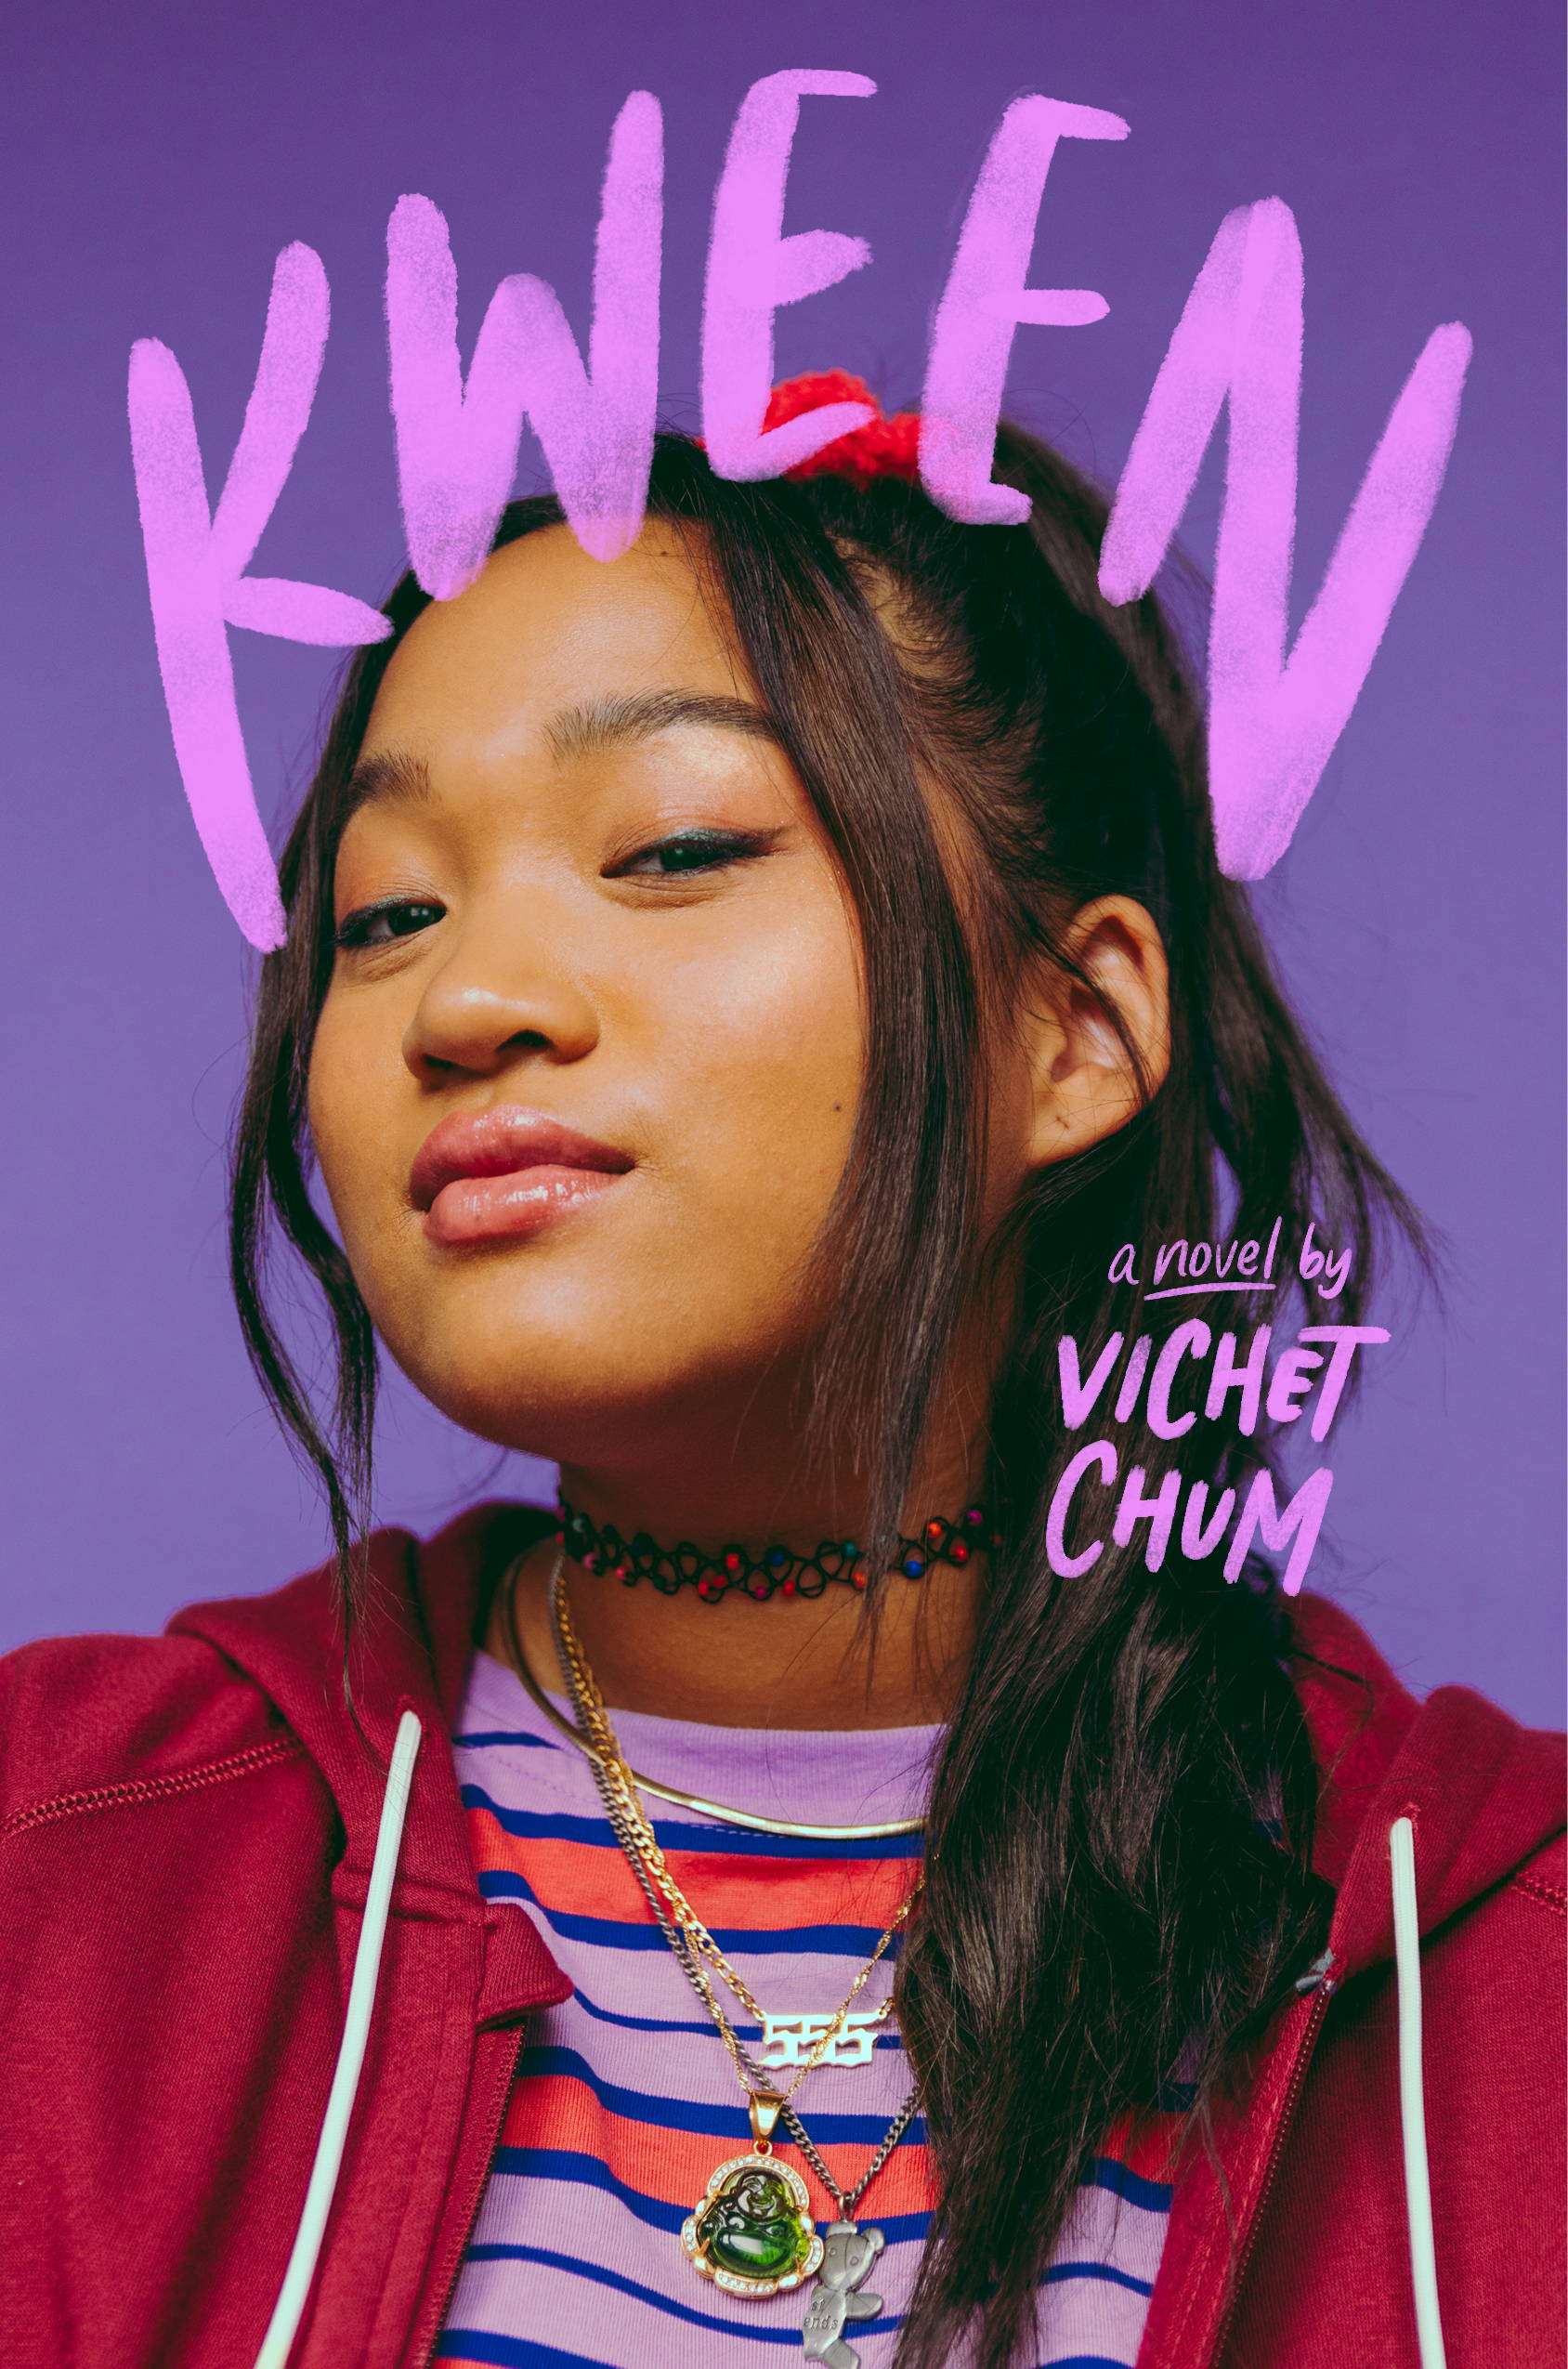 cover of kween by vichet chum